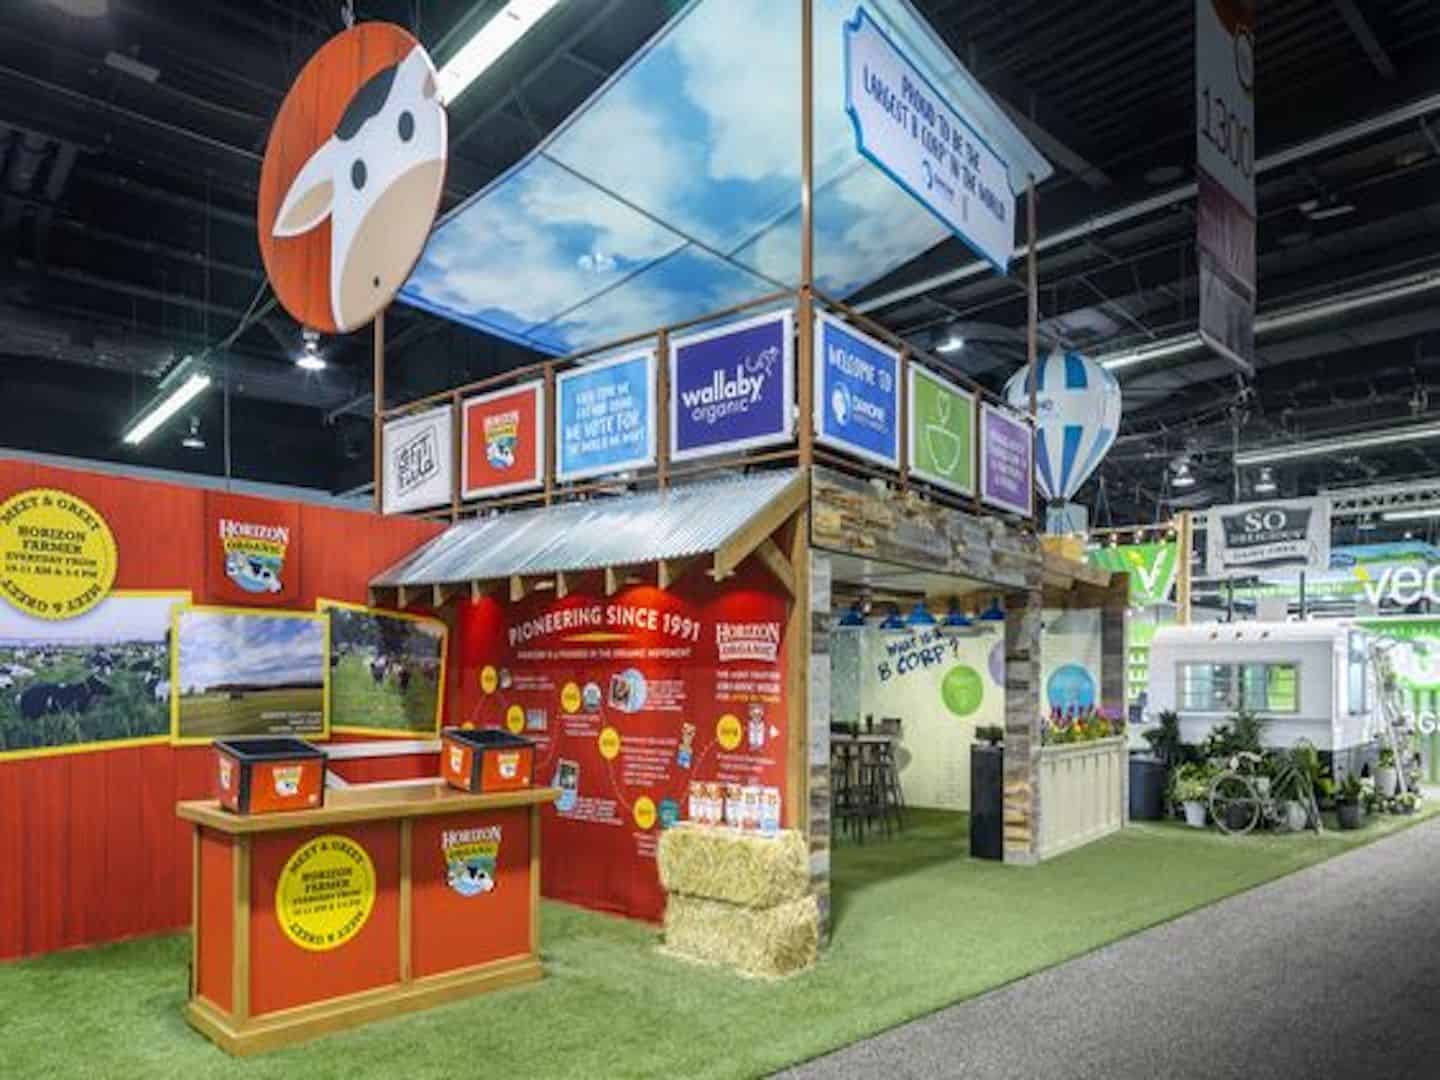 4 Tips In Setting Up A Booth in Trade Shows